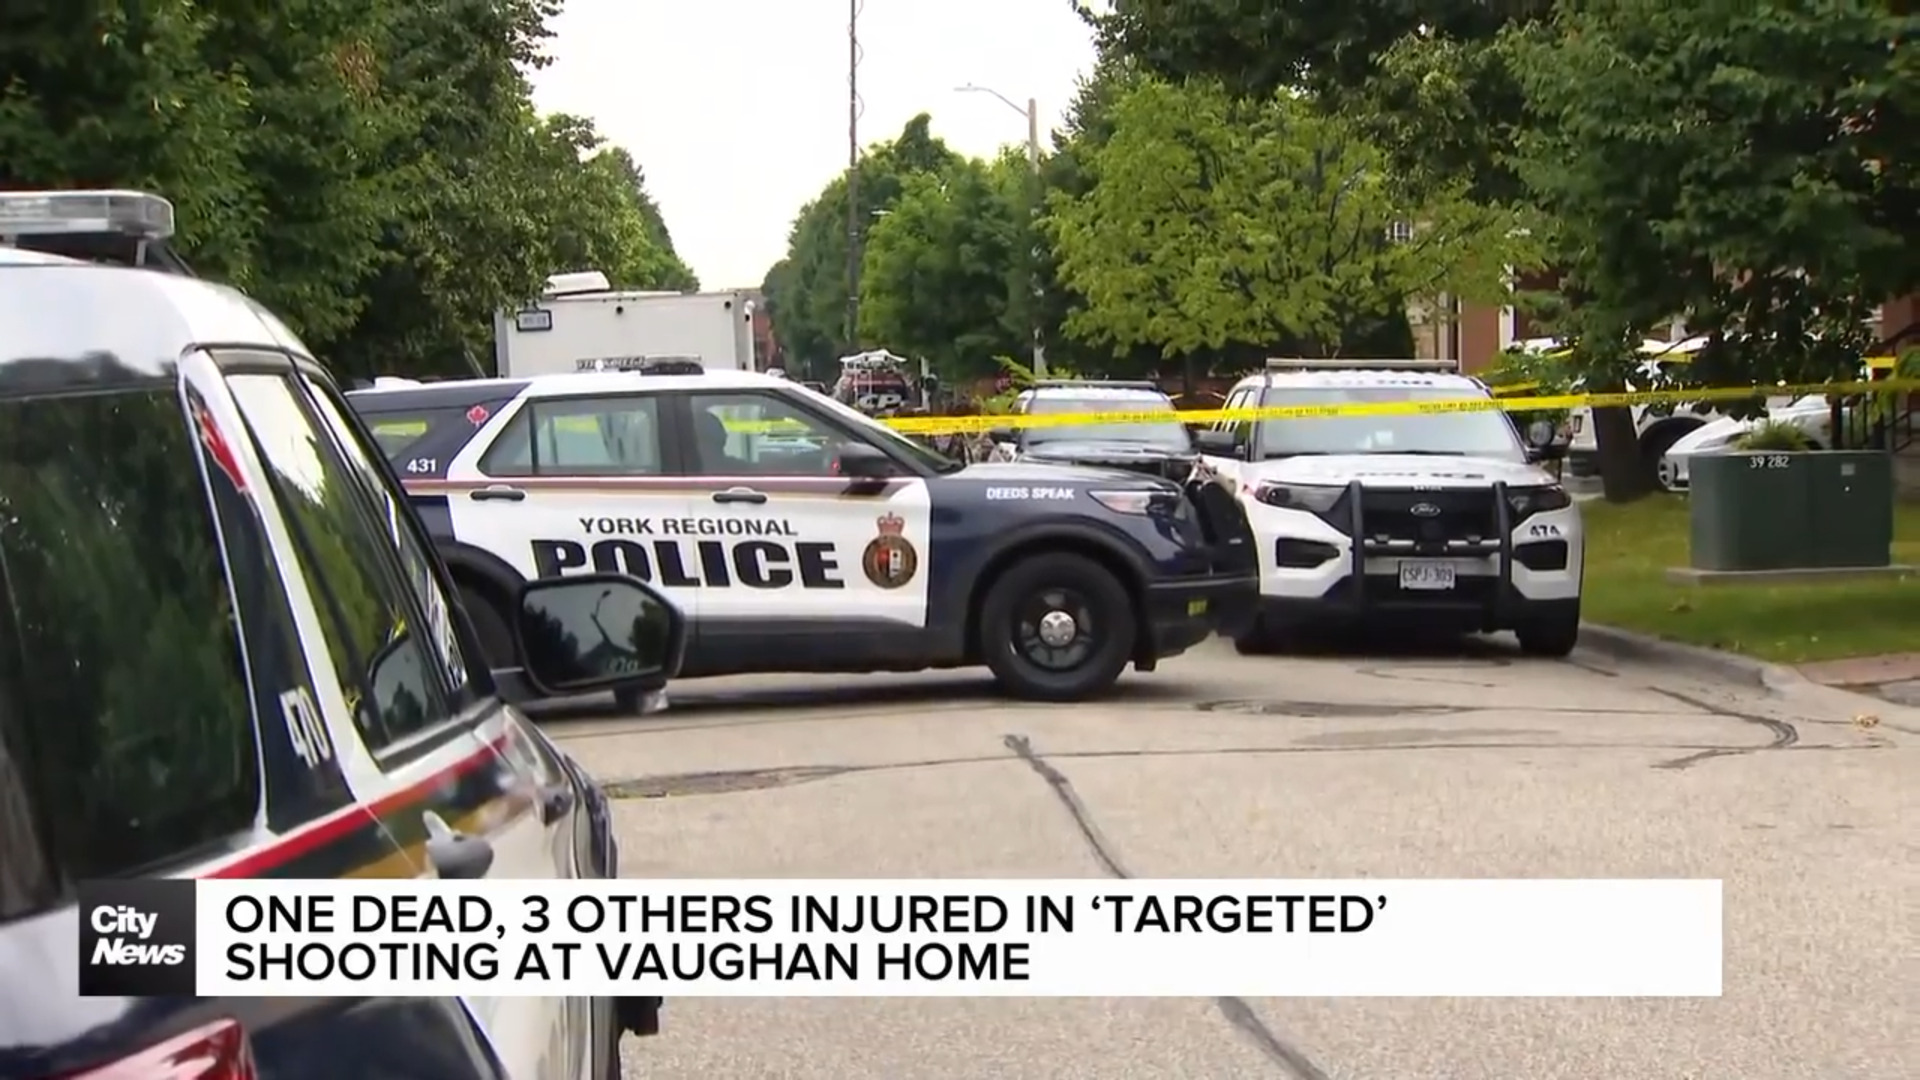 ‘Targeted’ shooting in a Vaughan home leaves one dead, 3 others injured